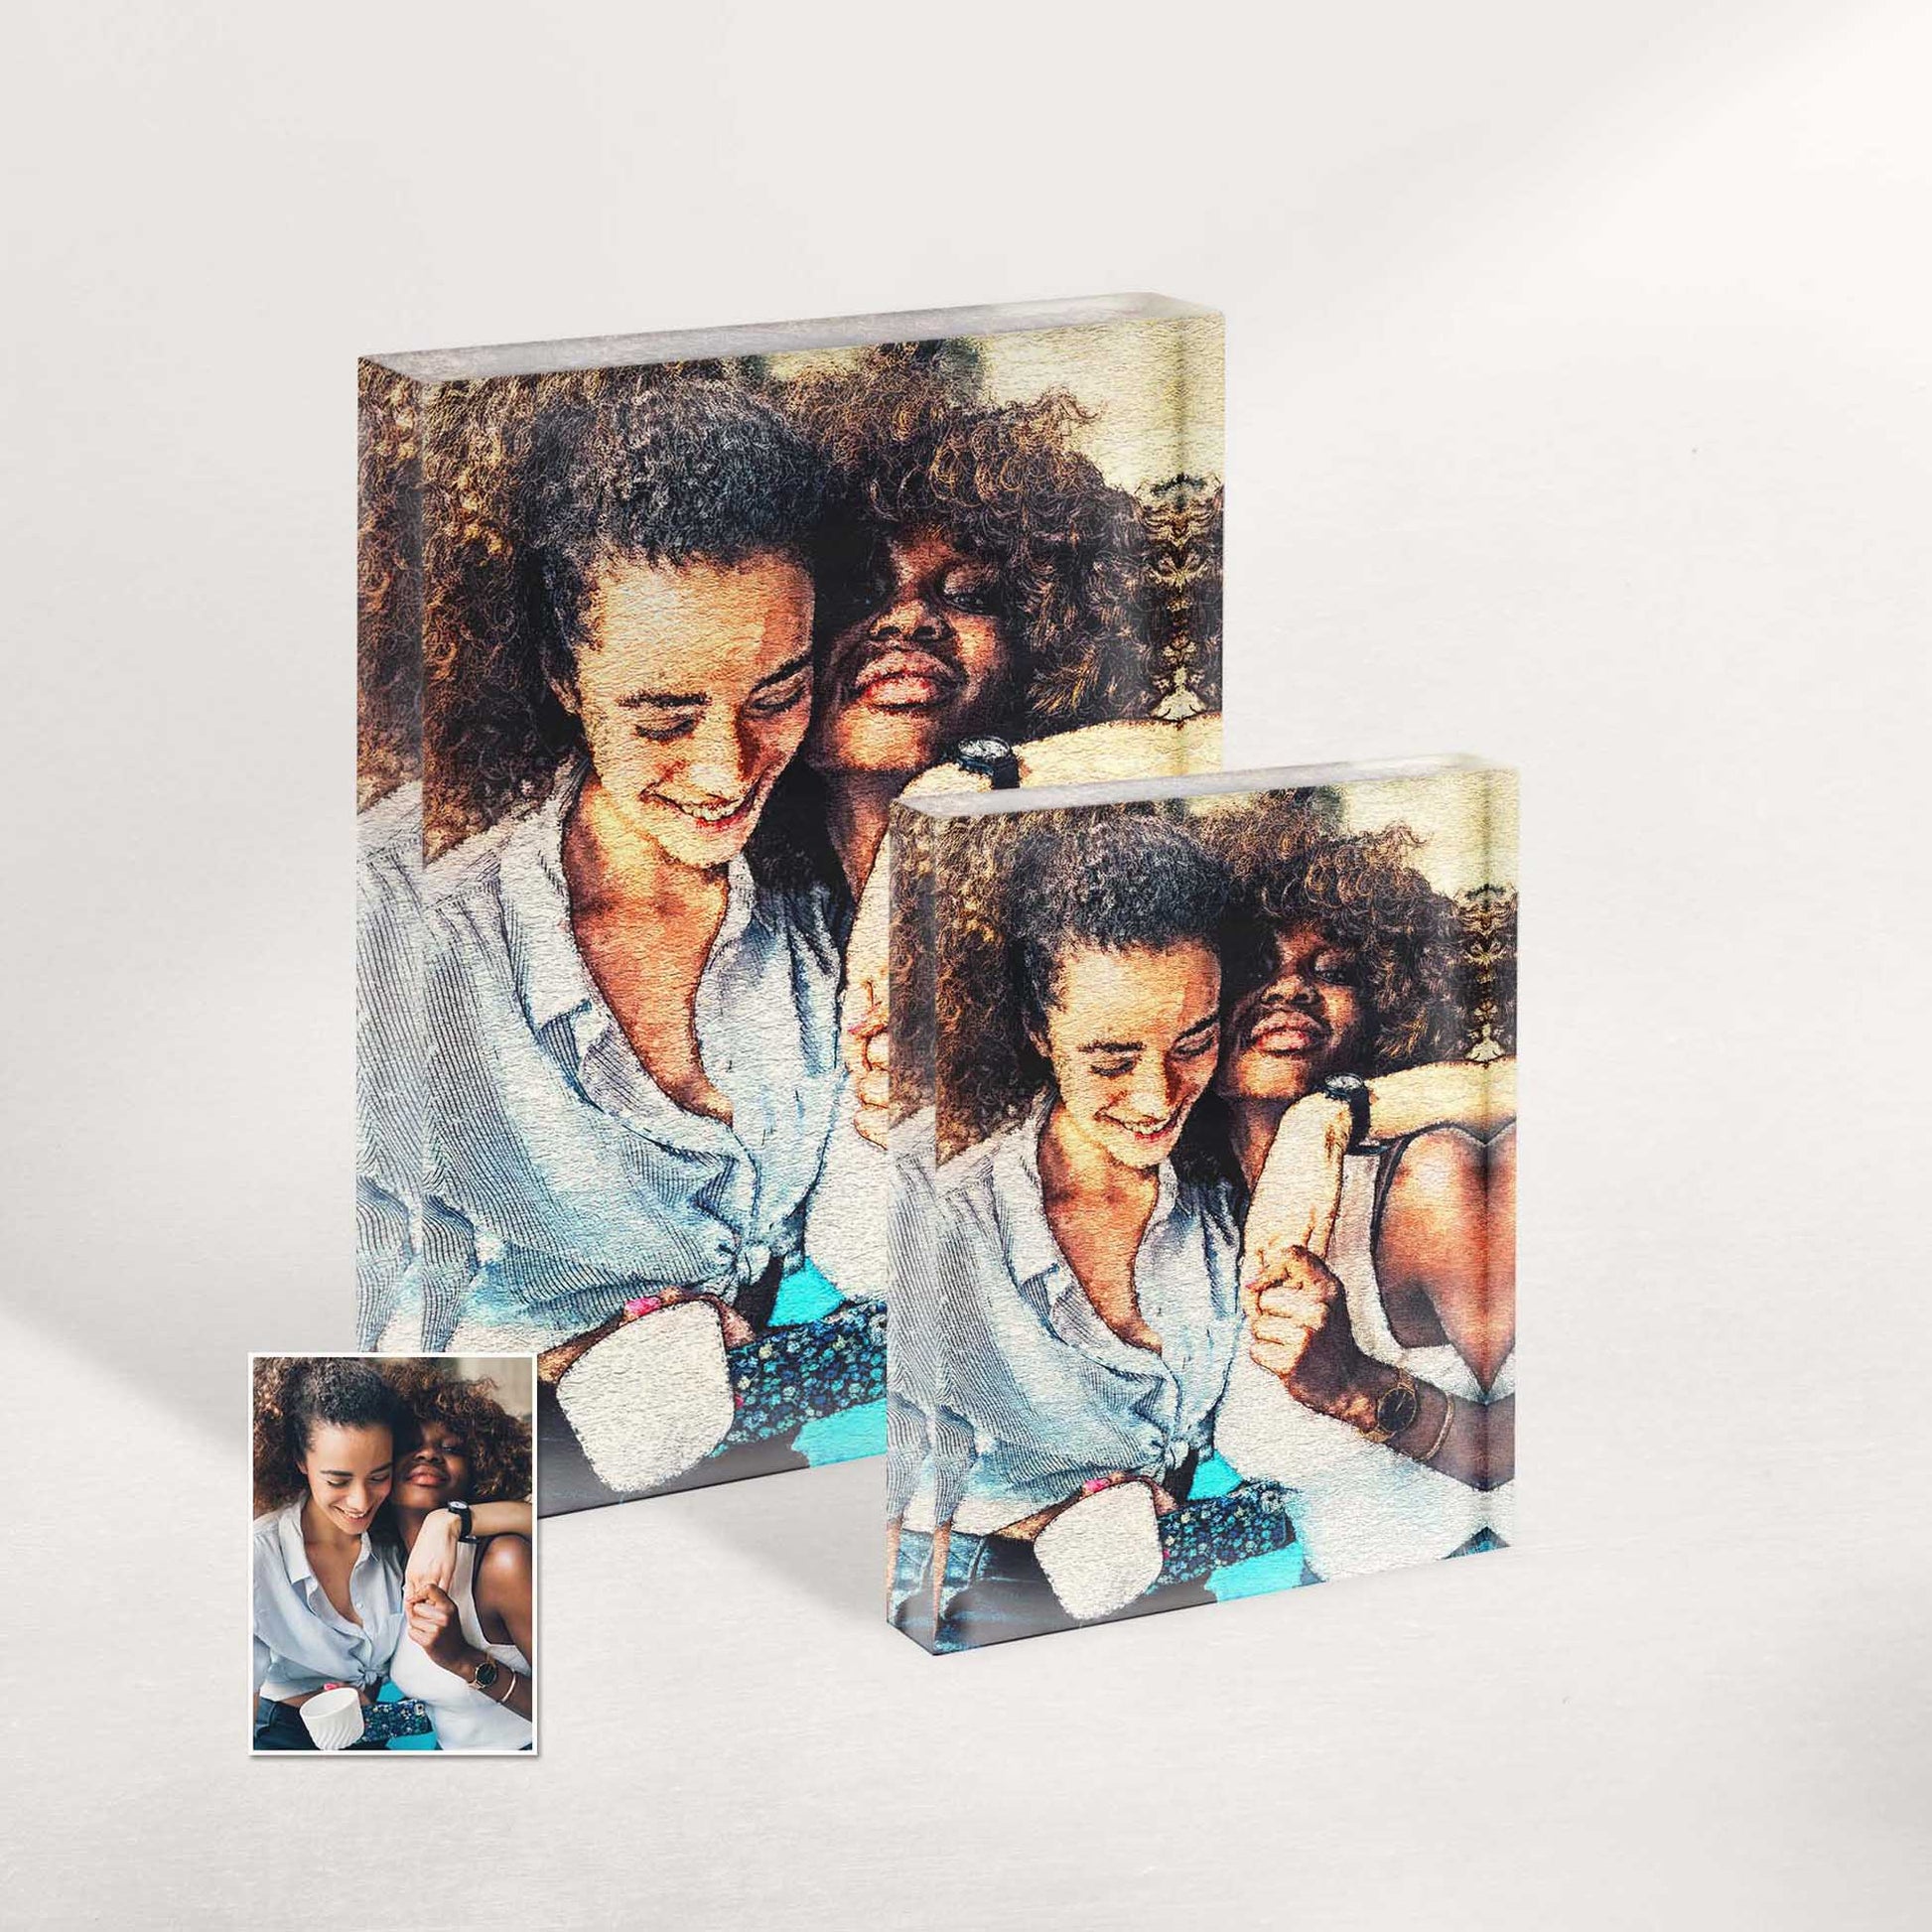 Celebrate your family's story with our Personalised Aquarelle Acrylic Block Photo. We transform your cherished photo into a stunning watercolor-inspired art piece, capturing the essence and emotions